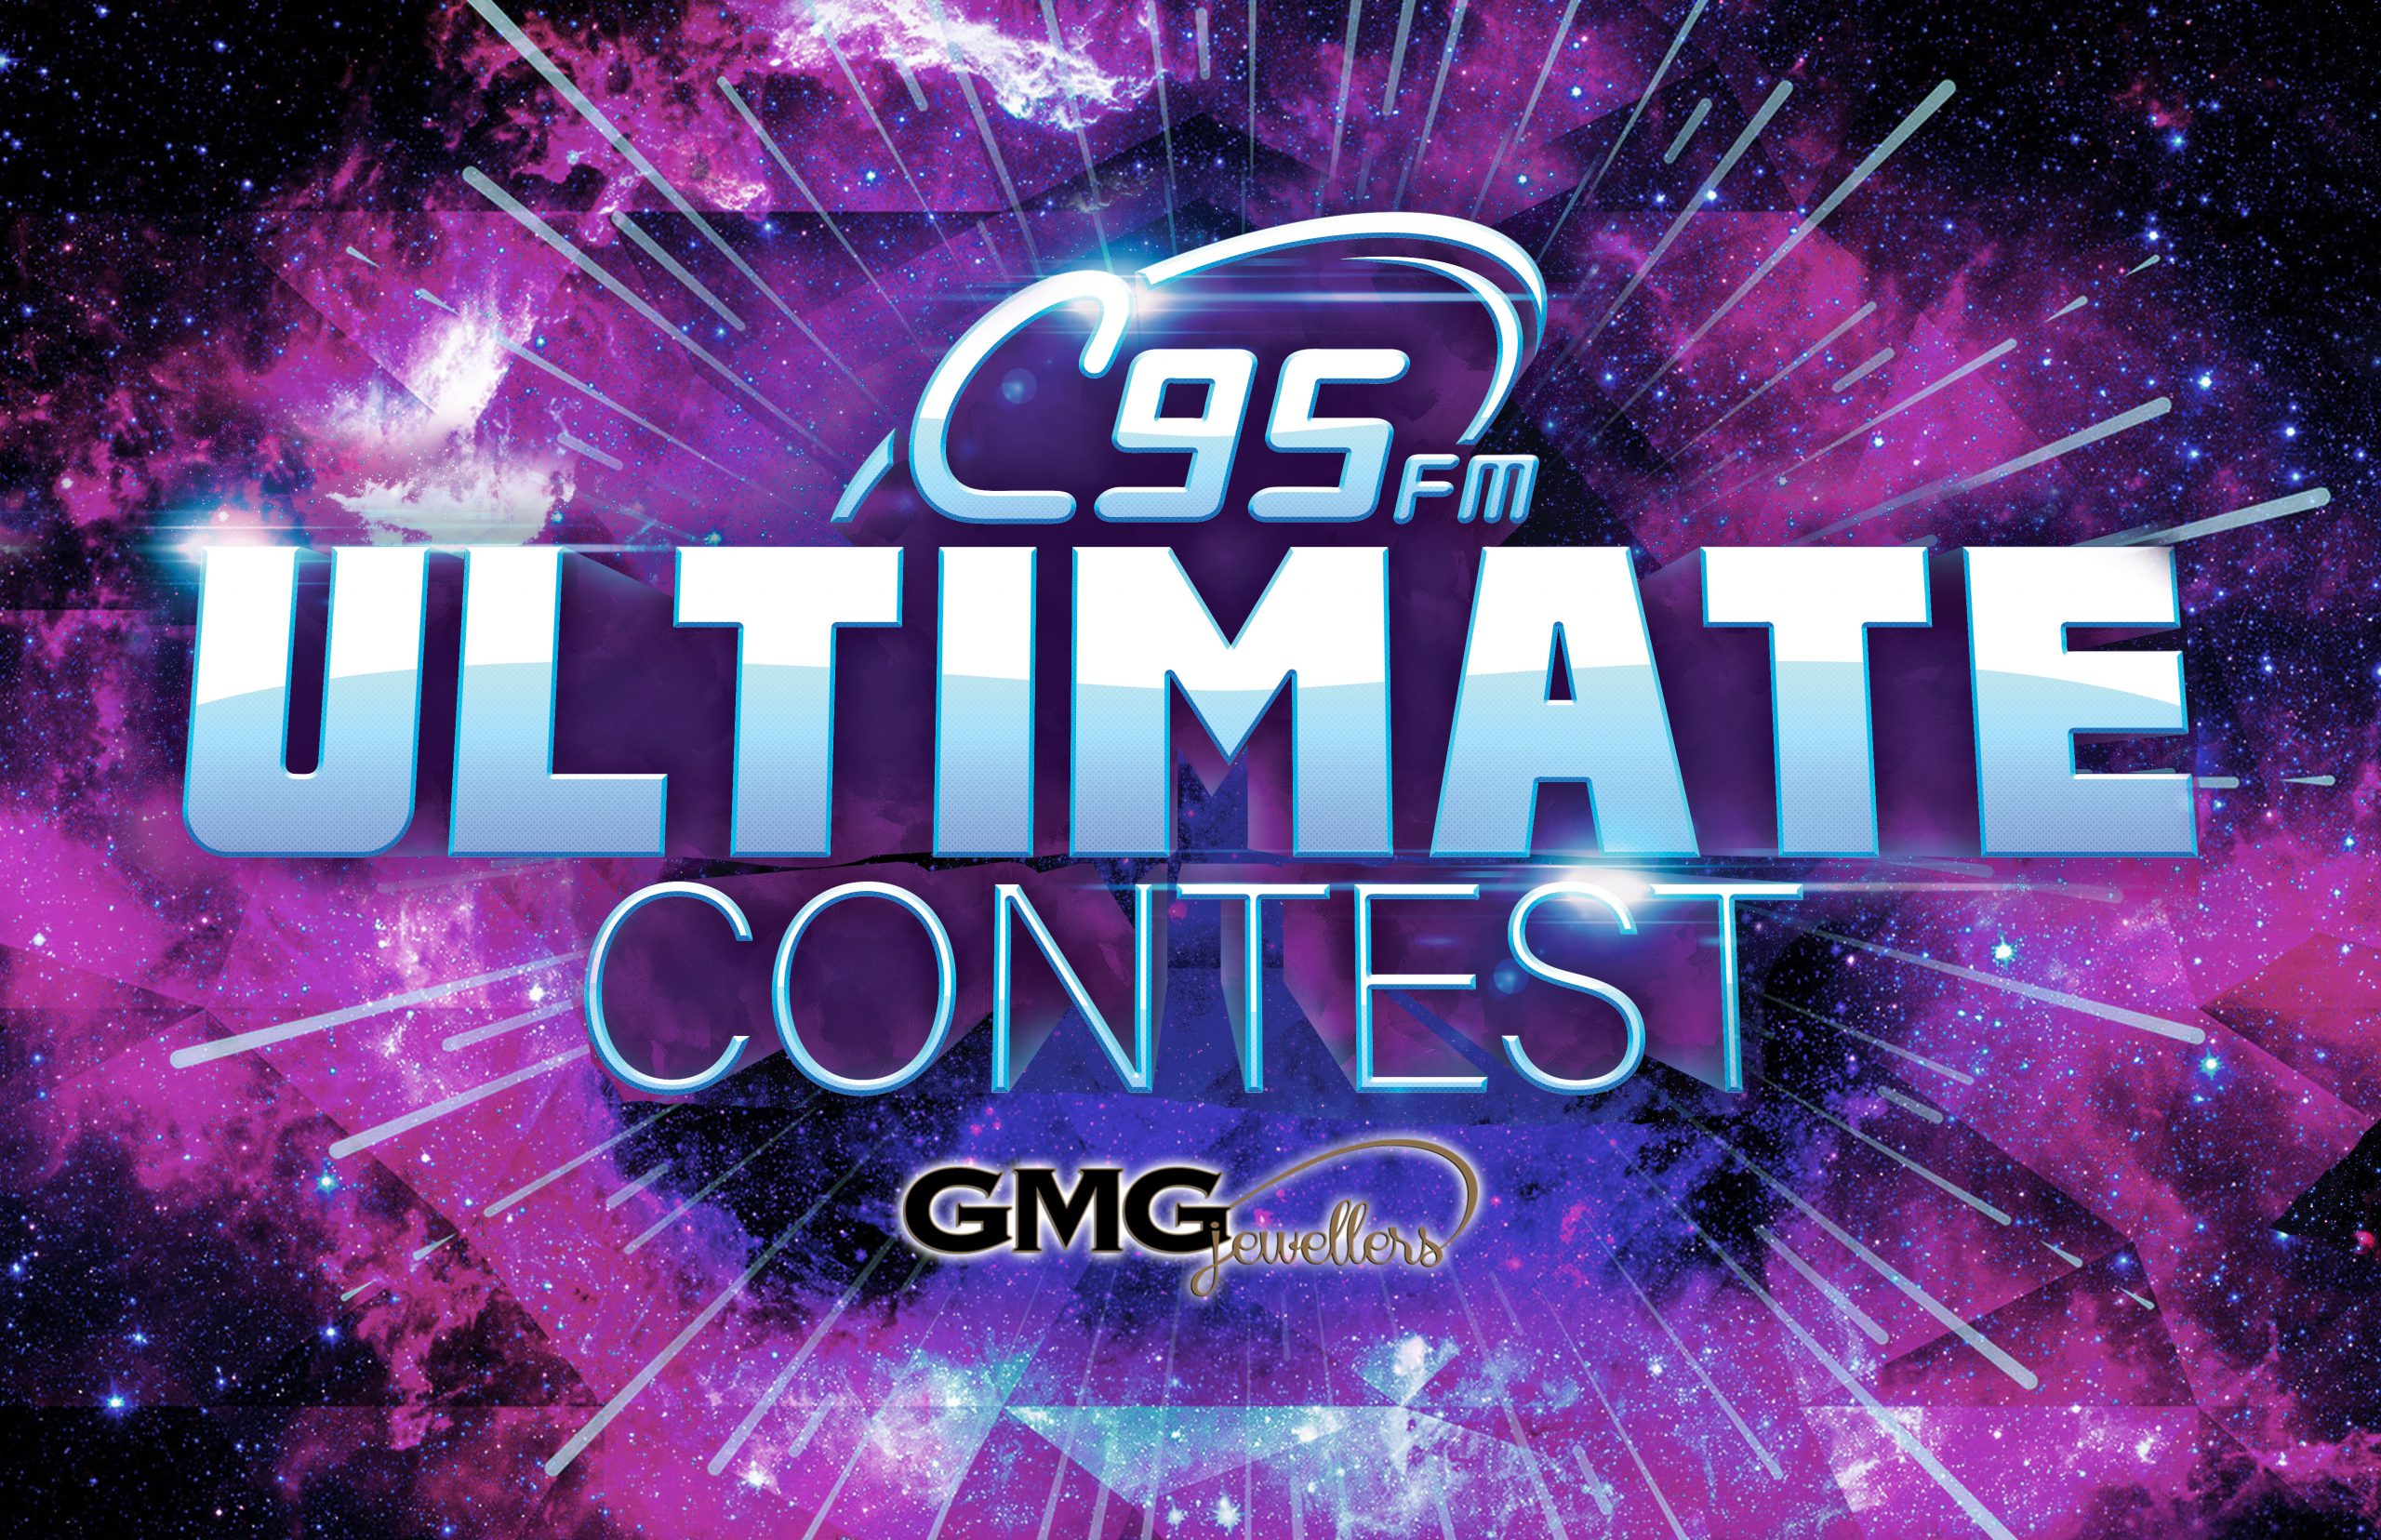 GMG Jewellers is Pleased to Be the Main Sponsor for the C95 FM Ultimate Contest in Saskatoon, Saskatchewan